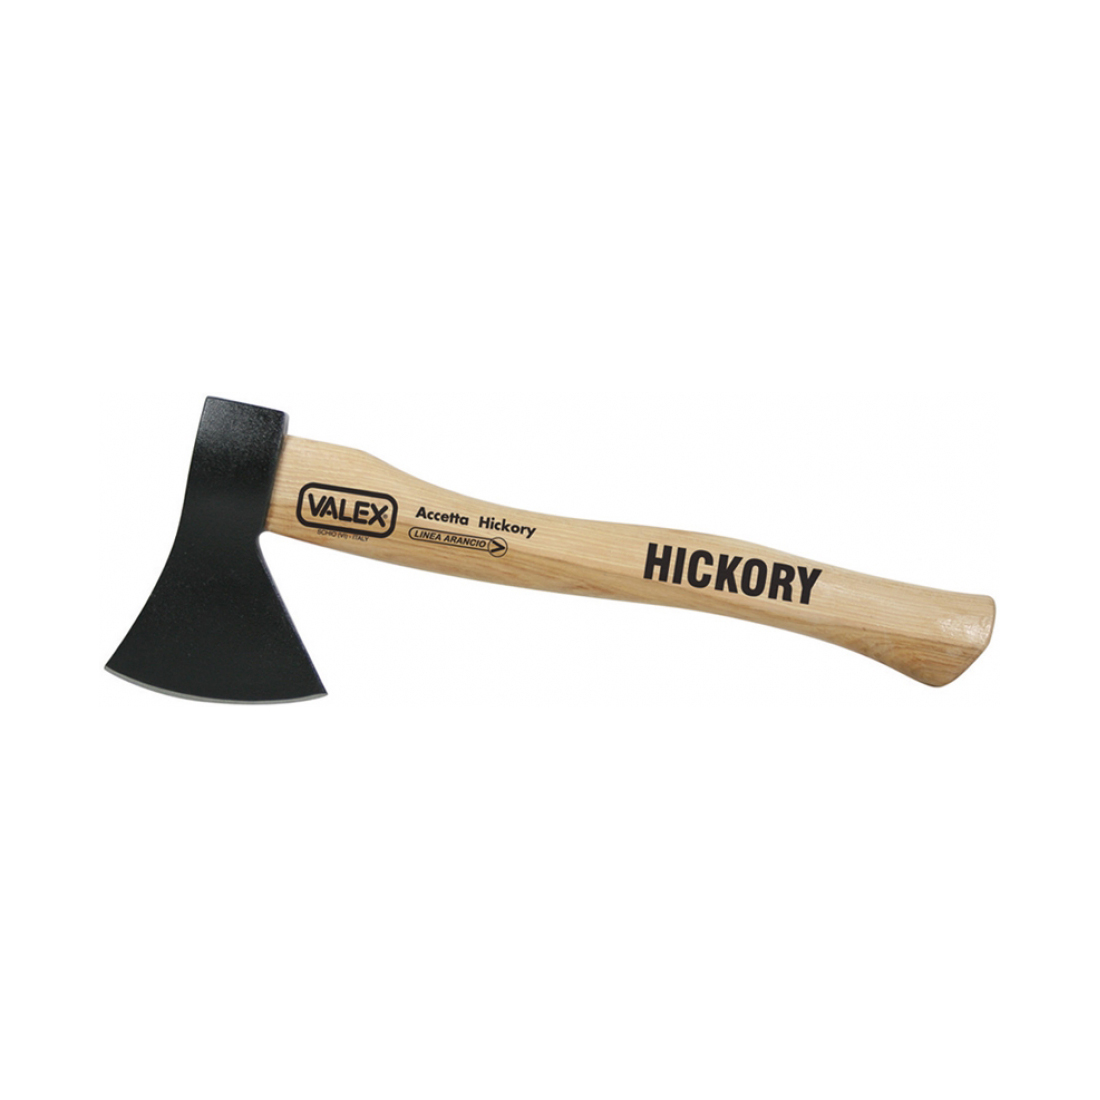 Accetta manico hickory 1000 gr lung. 430 mm